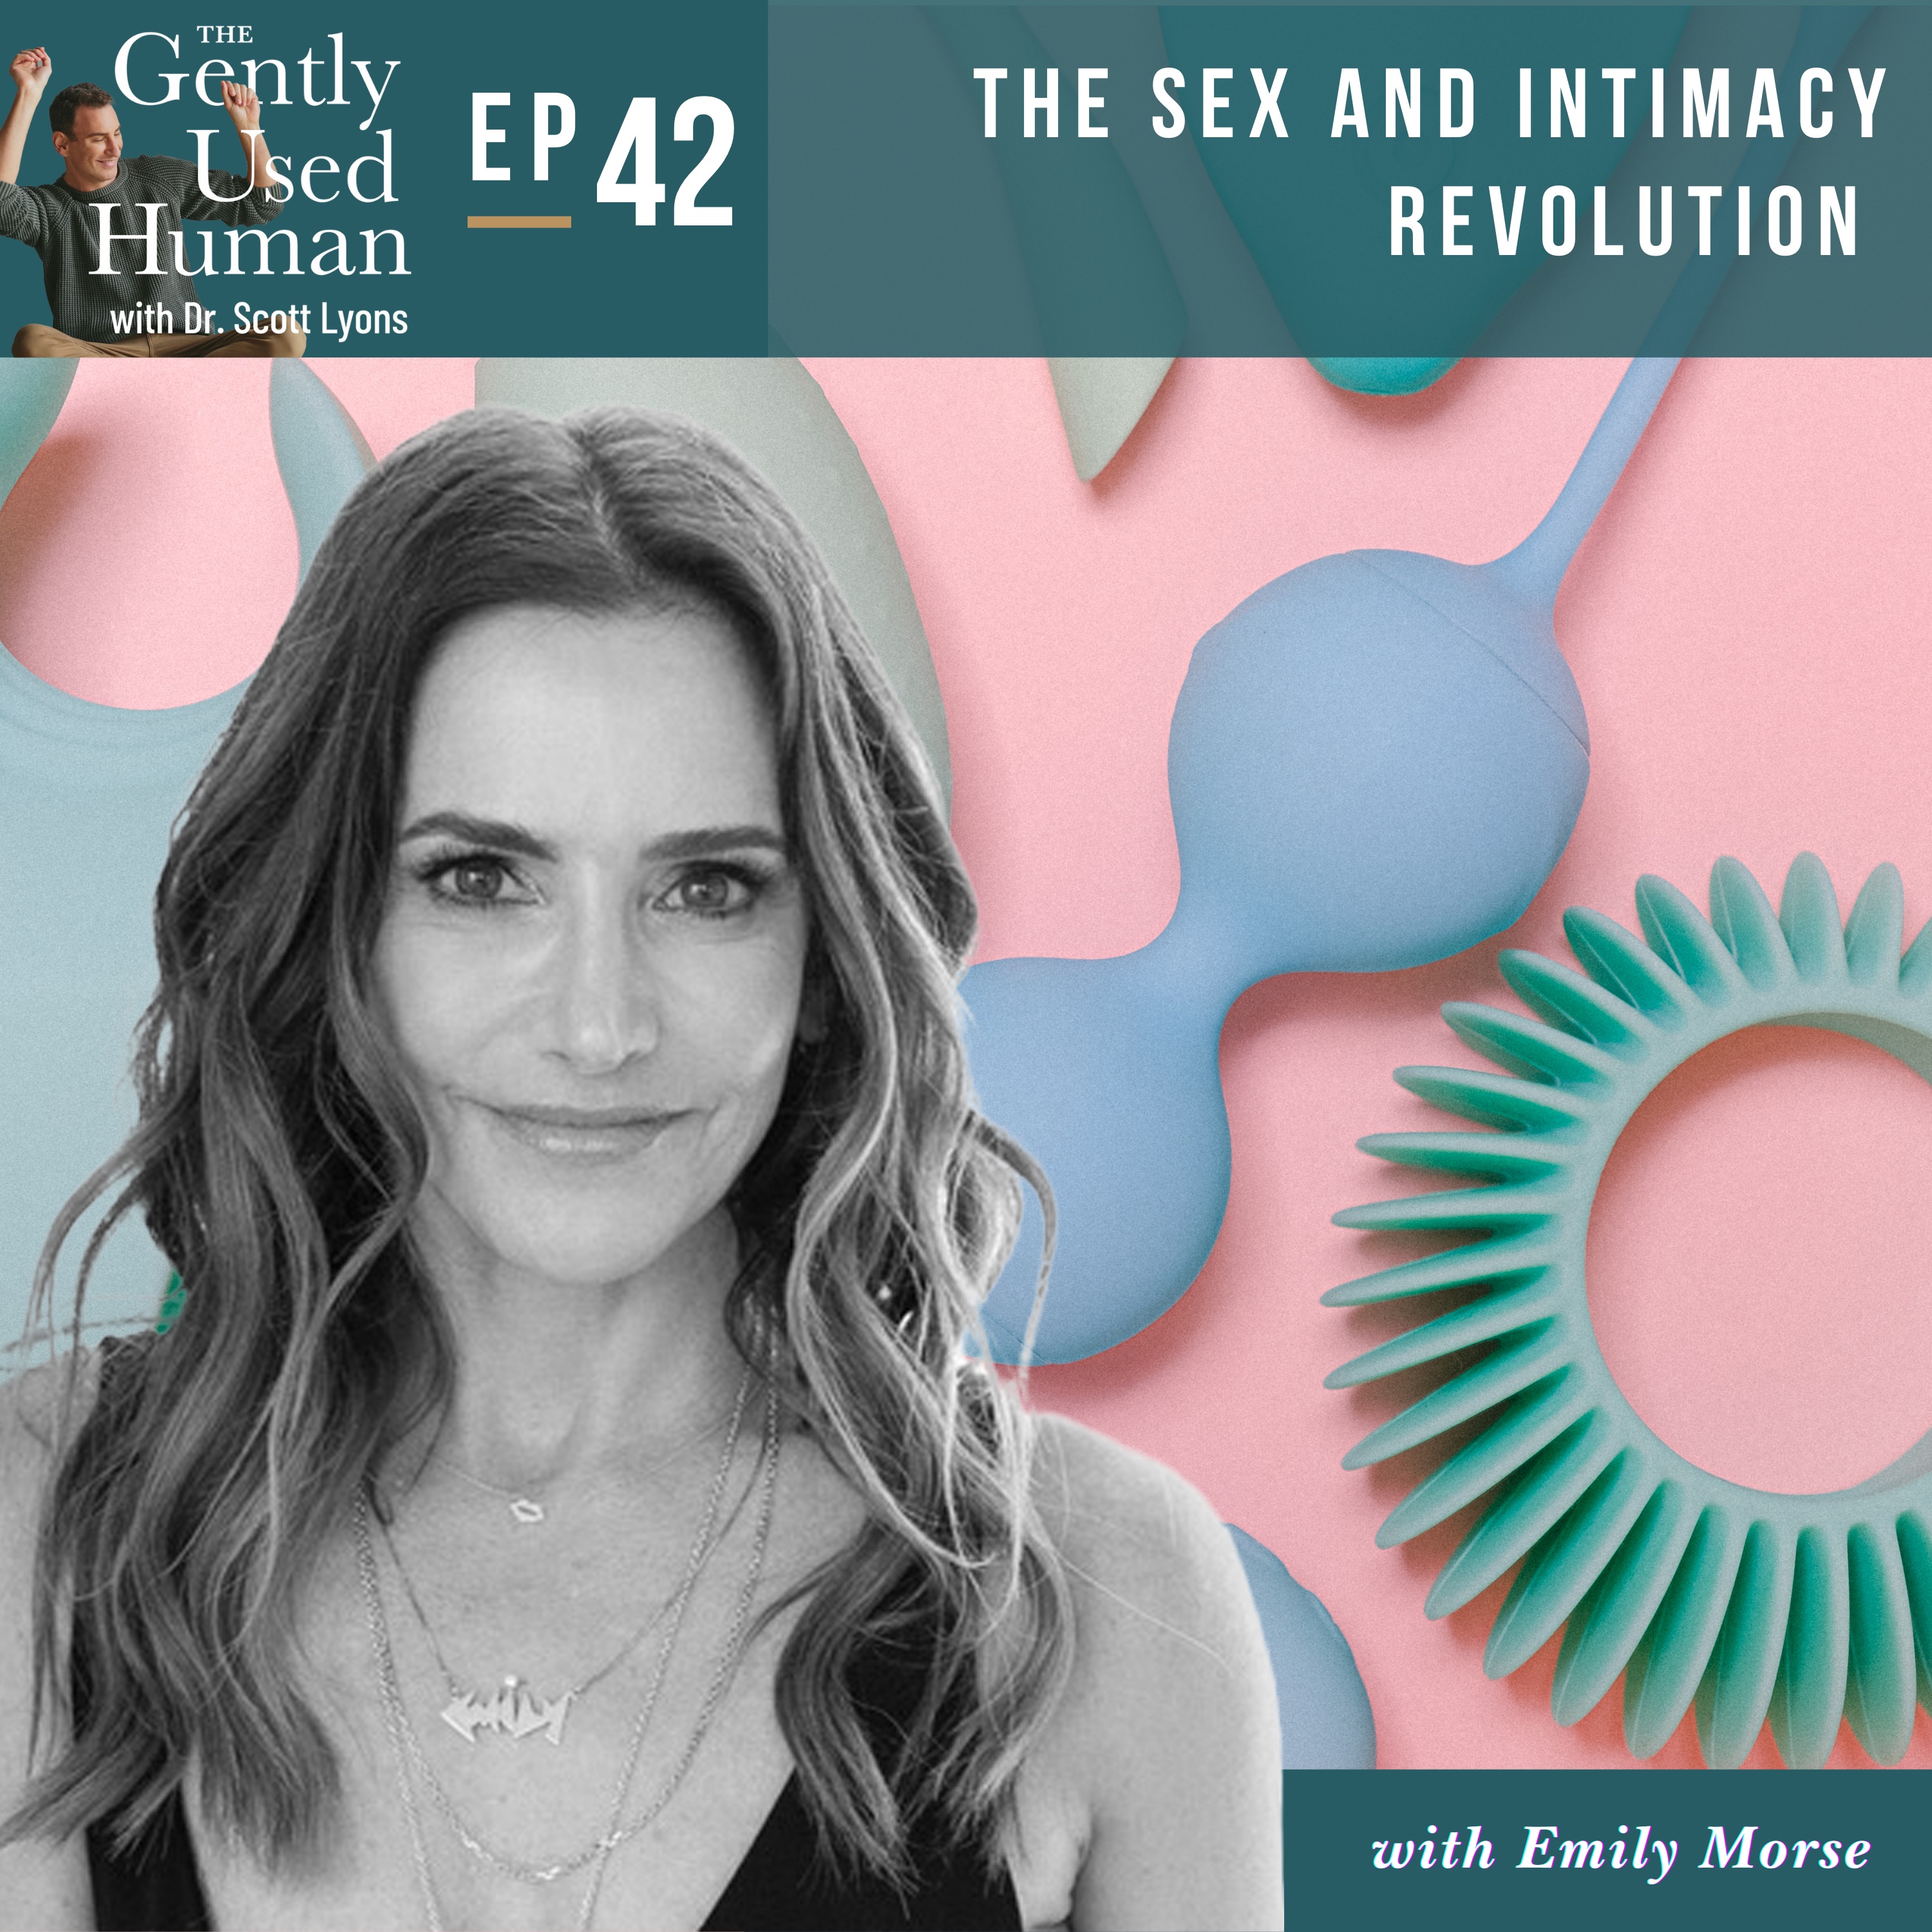 The Sex and Intimacy Revolution with Dr. Emily Morse